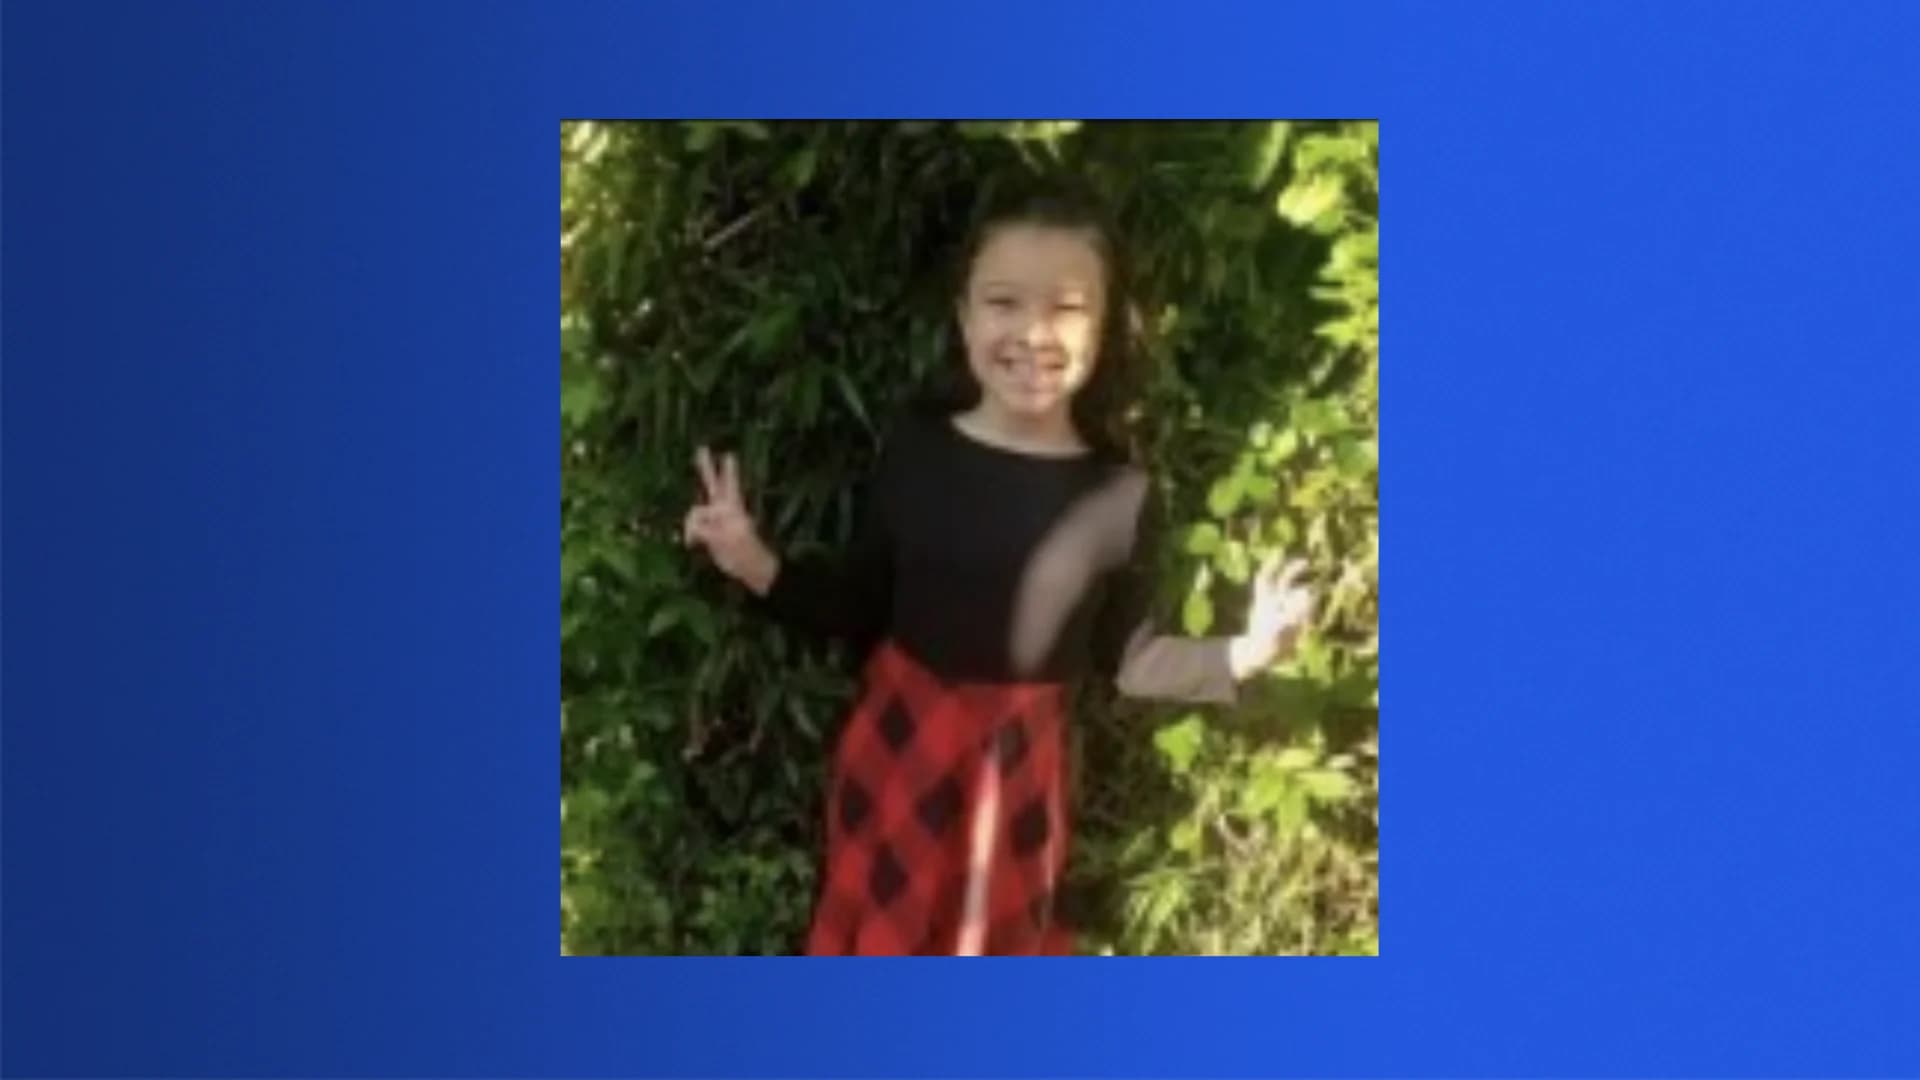 Police: Amber Alert canceled for 7-year-old who was reported missing from Queens